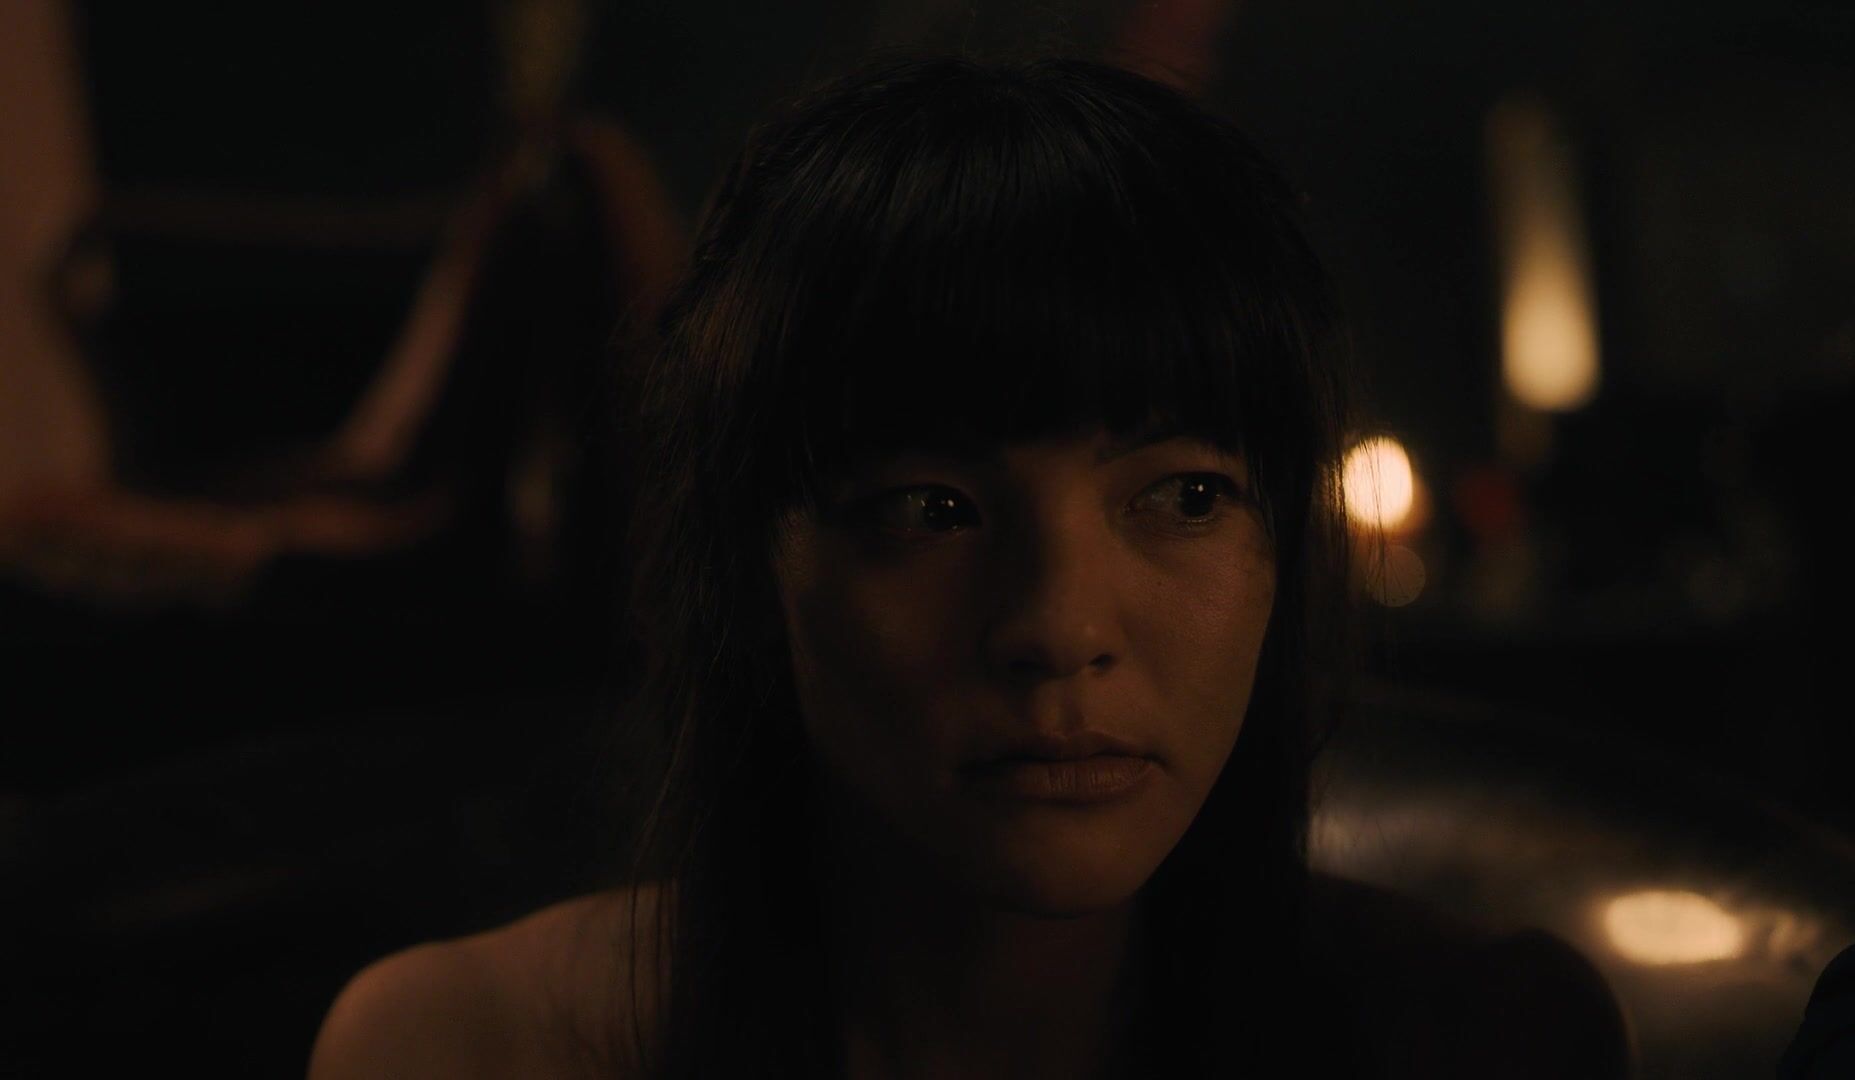 Deep Hanni Choi is sexy to look at in Warrior s01e07 (2019) Women - 1